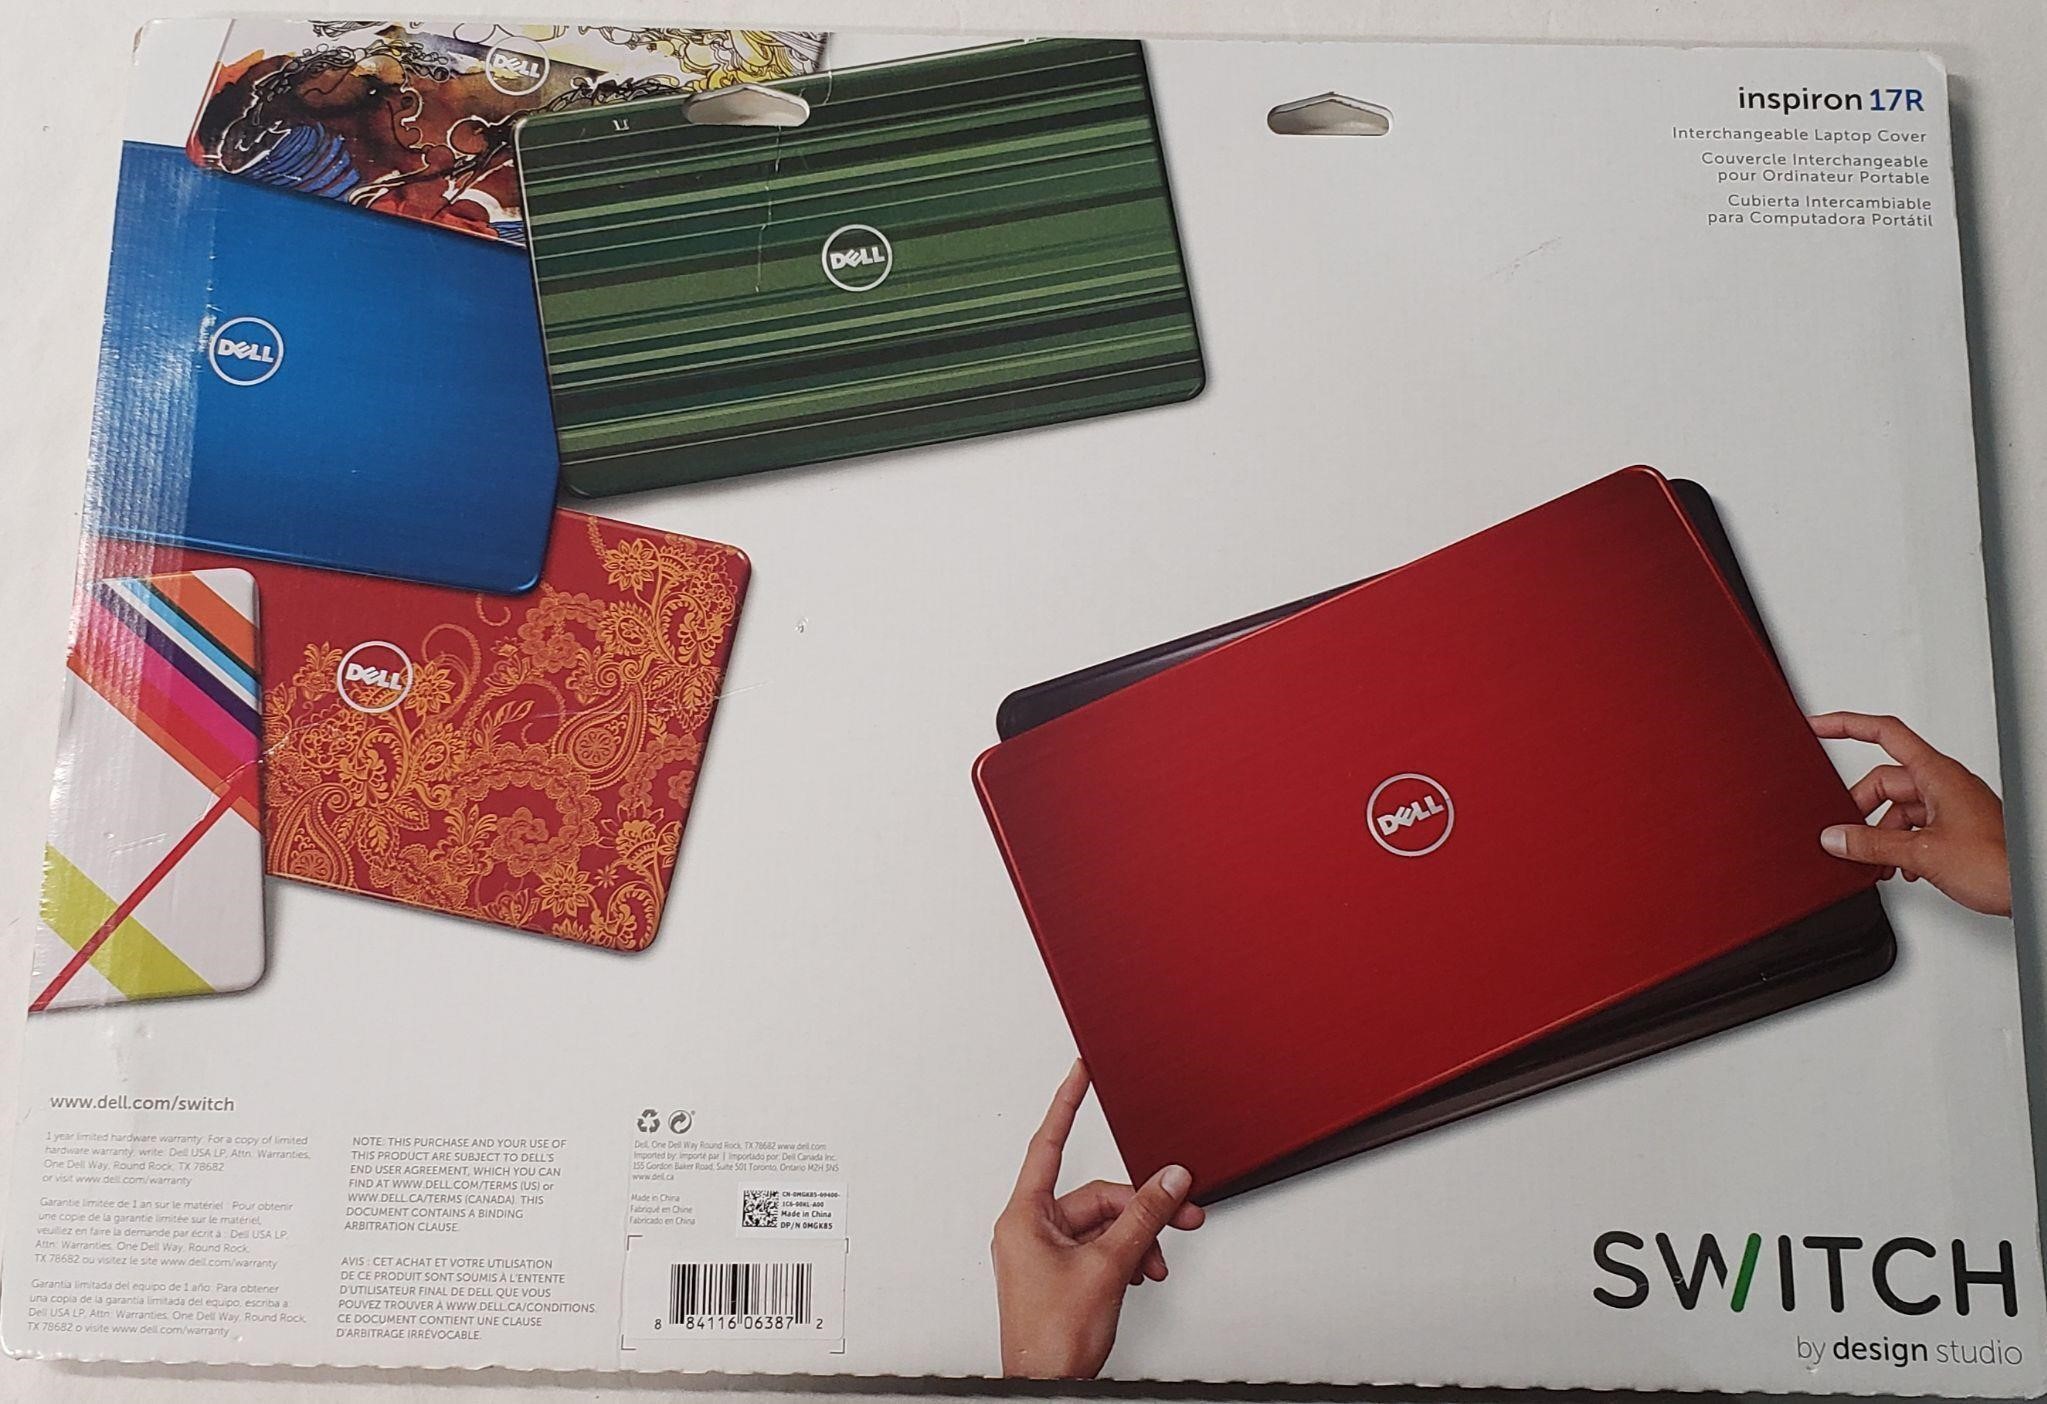 Dell Inspiron 17R Interchangeable laptop cover